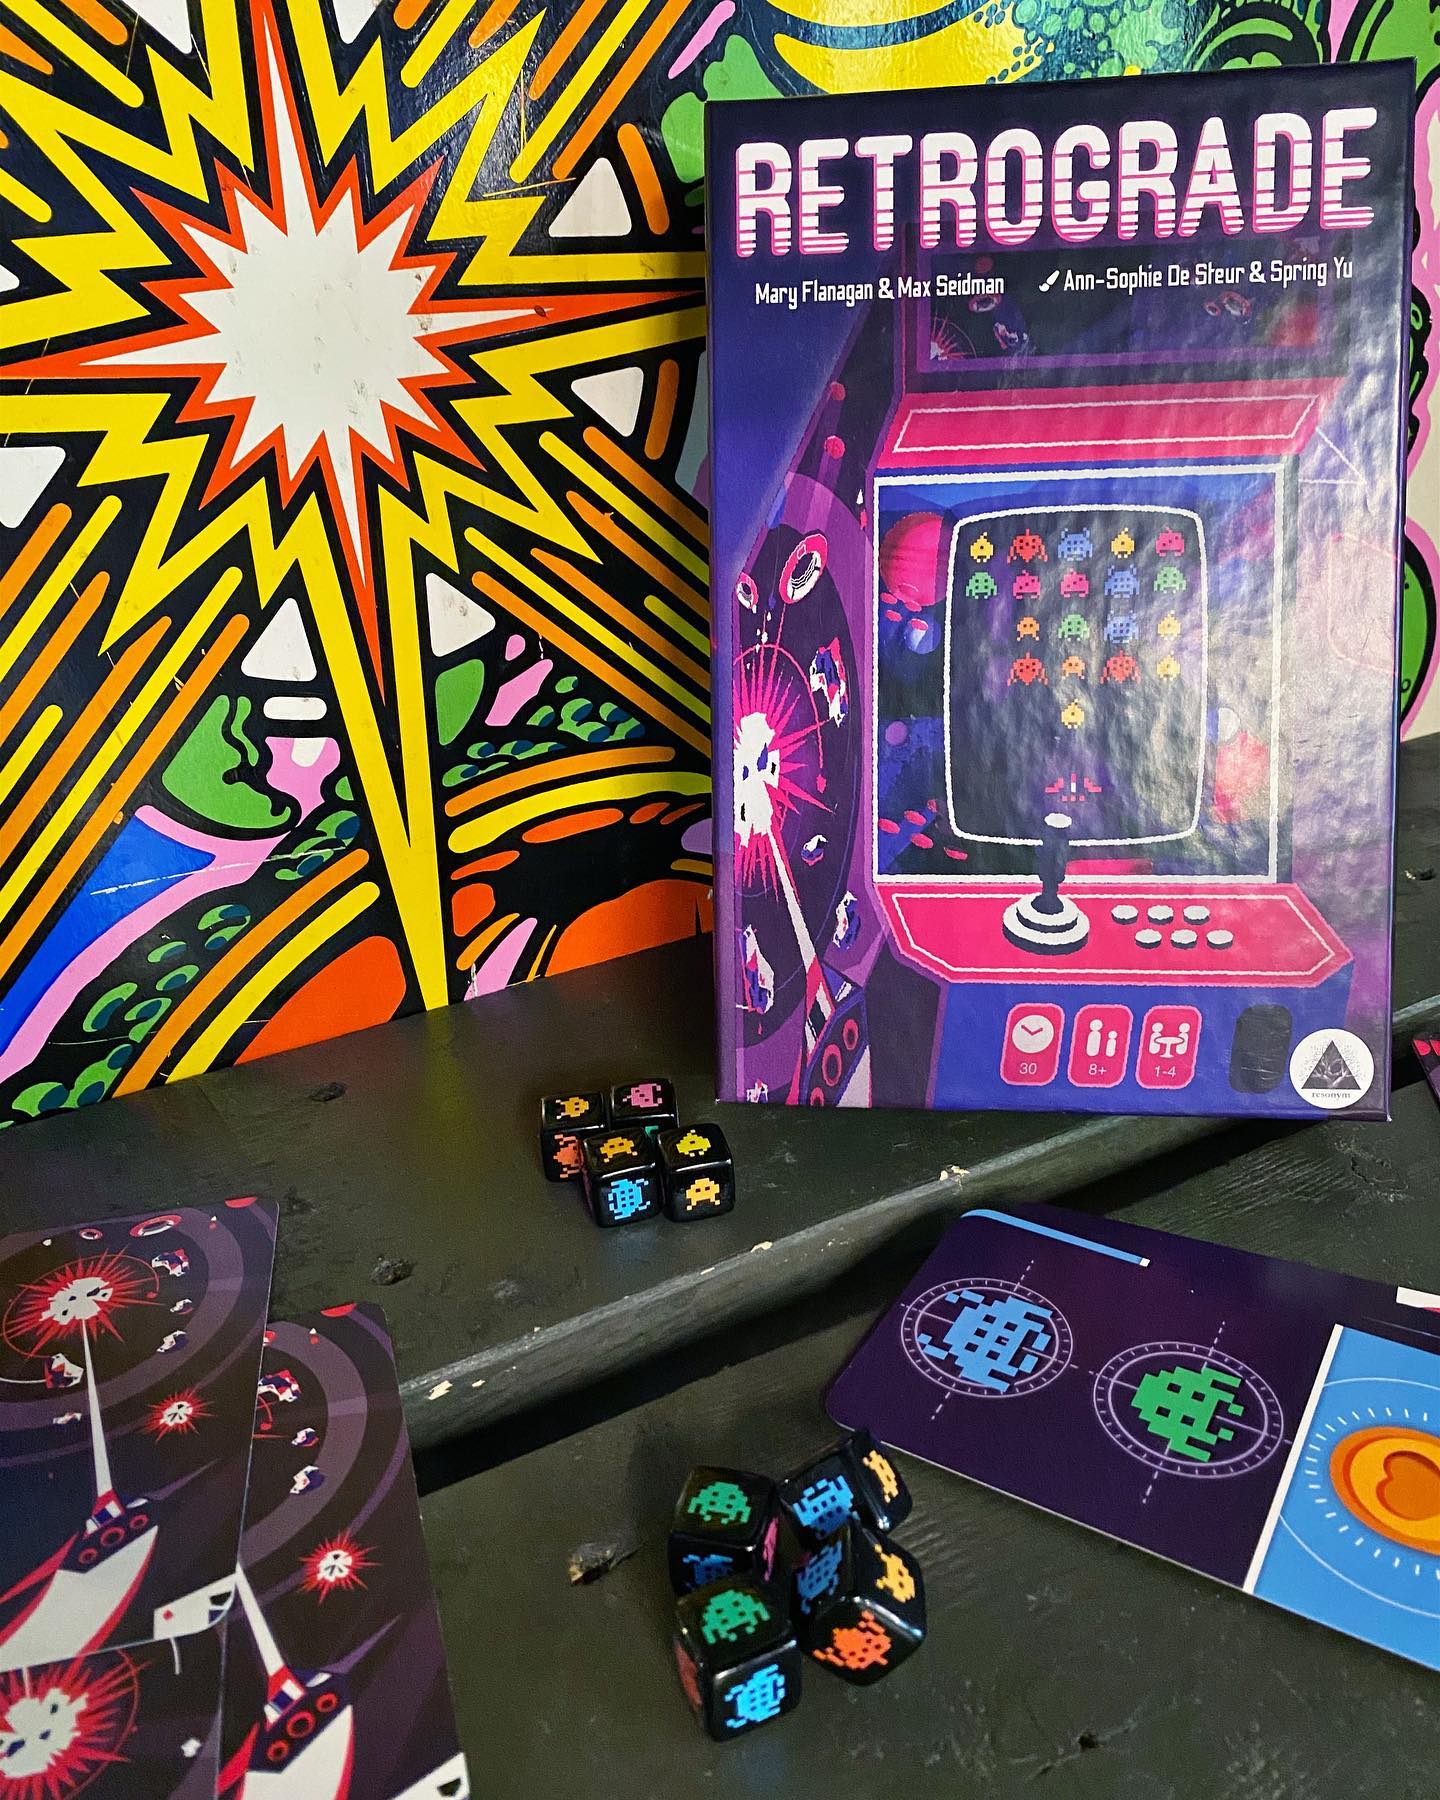 Retrograde has officially funded! We’re so thankful for all the people who supported the game, and we’re excited to get these dice rolling. There are still a few hours left to back the most radical game this side of the Milky Way, so don’t miss out!

#boardgames #tabletopgames #bgg #dice #resonym #boardgaming #boardgamedesign #boardgamesofinstagram #familygamenight #gamenight #kickstartergames #indieboardgame #indie #retro #retrogaming #aesthetic #arcade